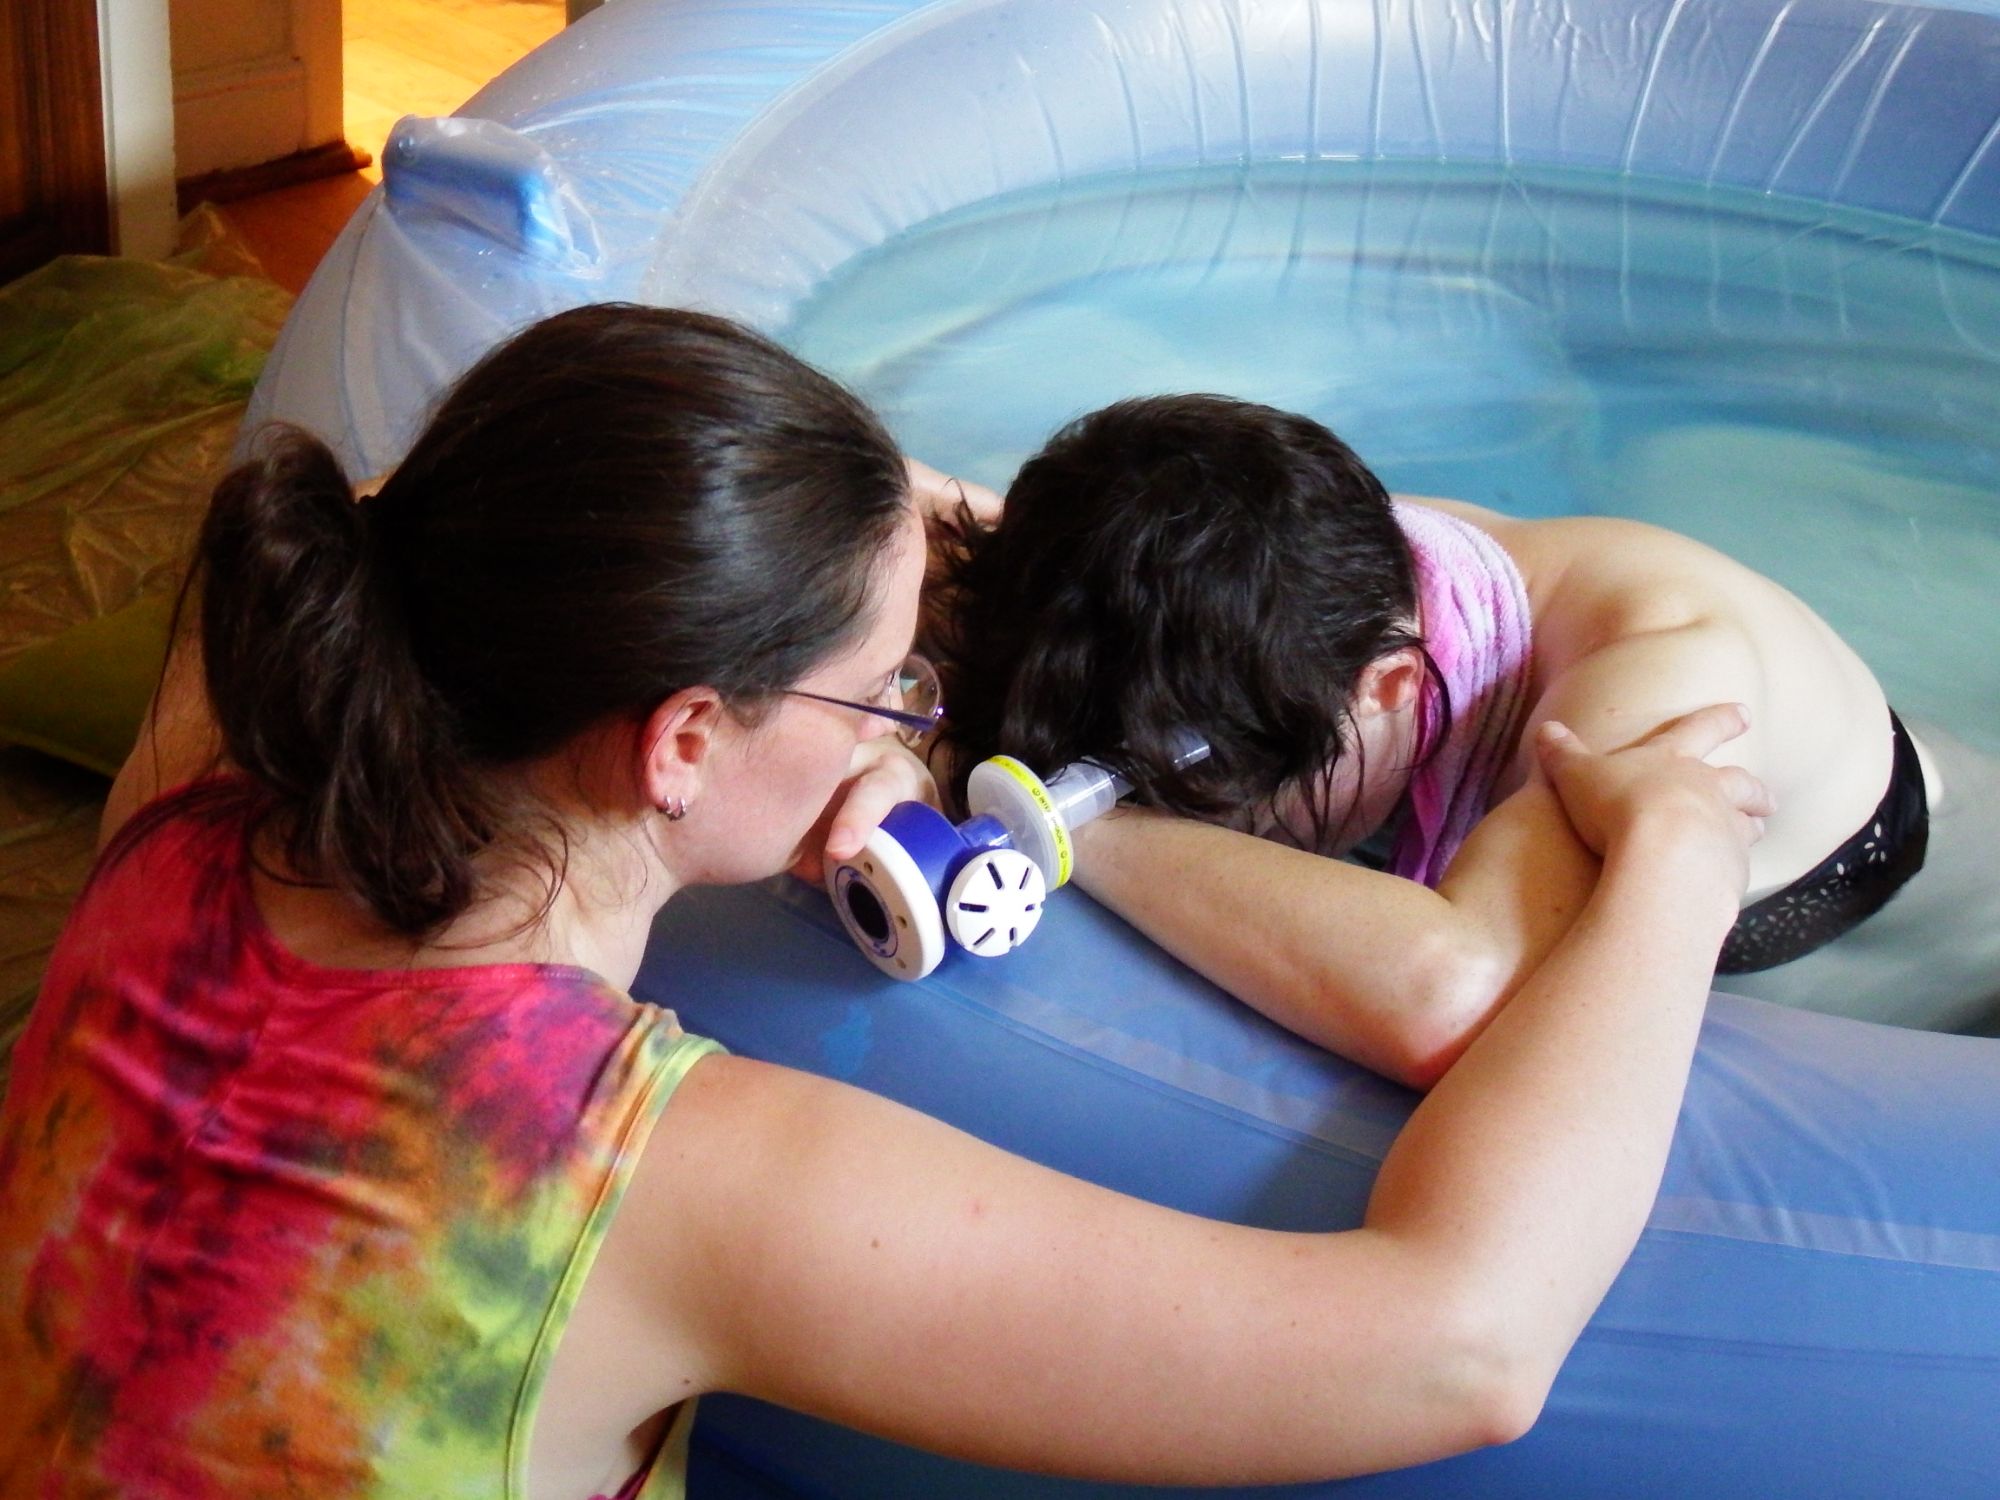 A woman labouring in a birth pool. Caz is providing physical touch over the side of the pool as she rests between contractions.